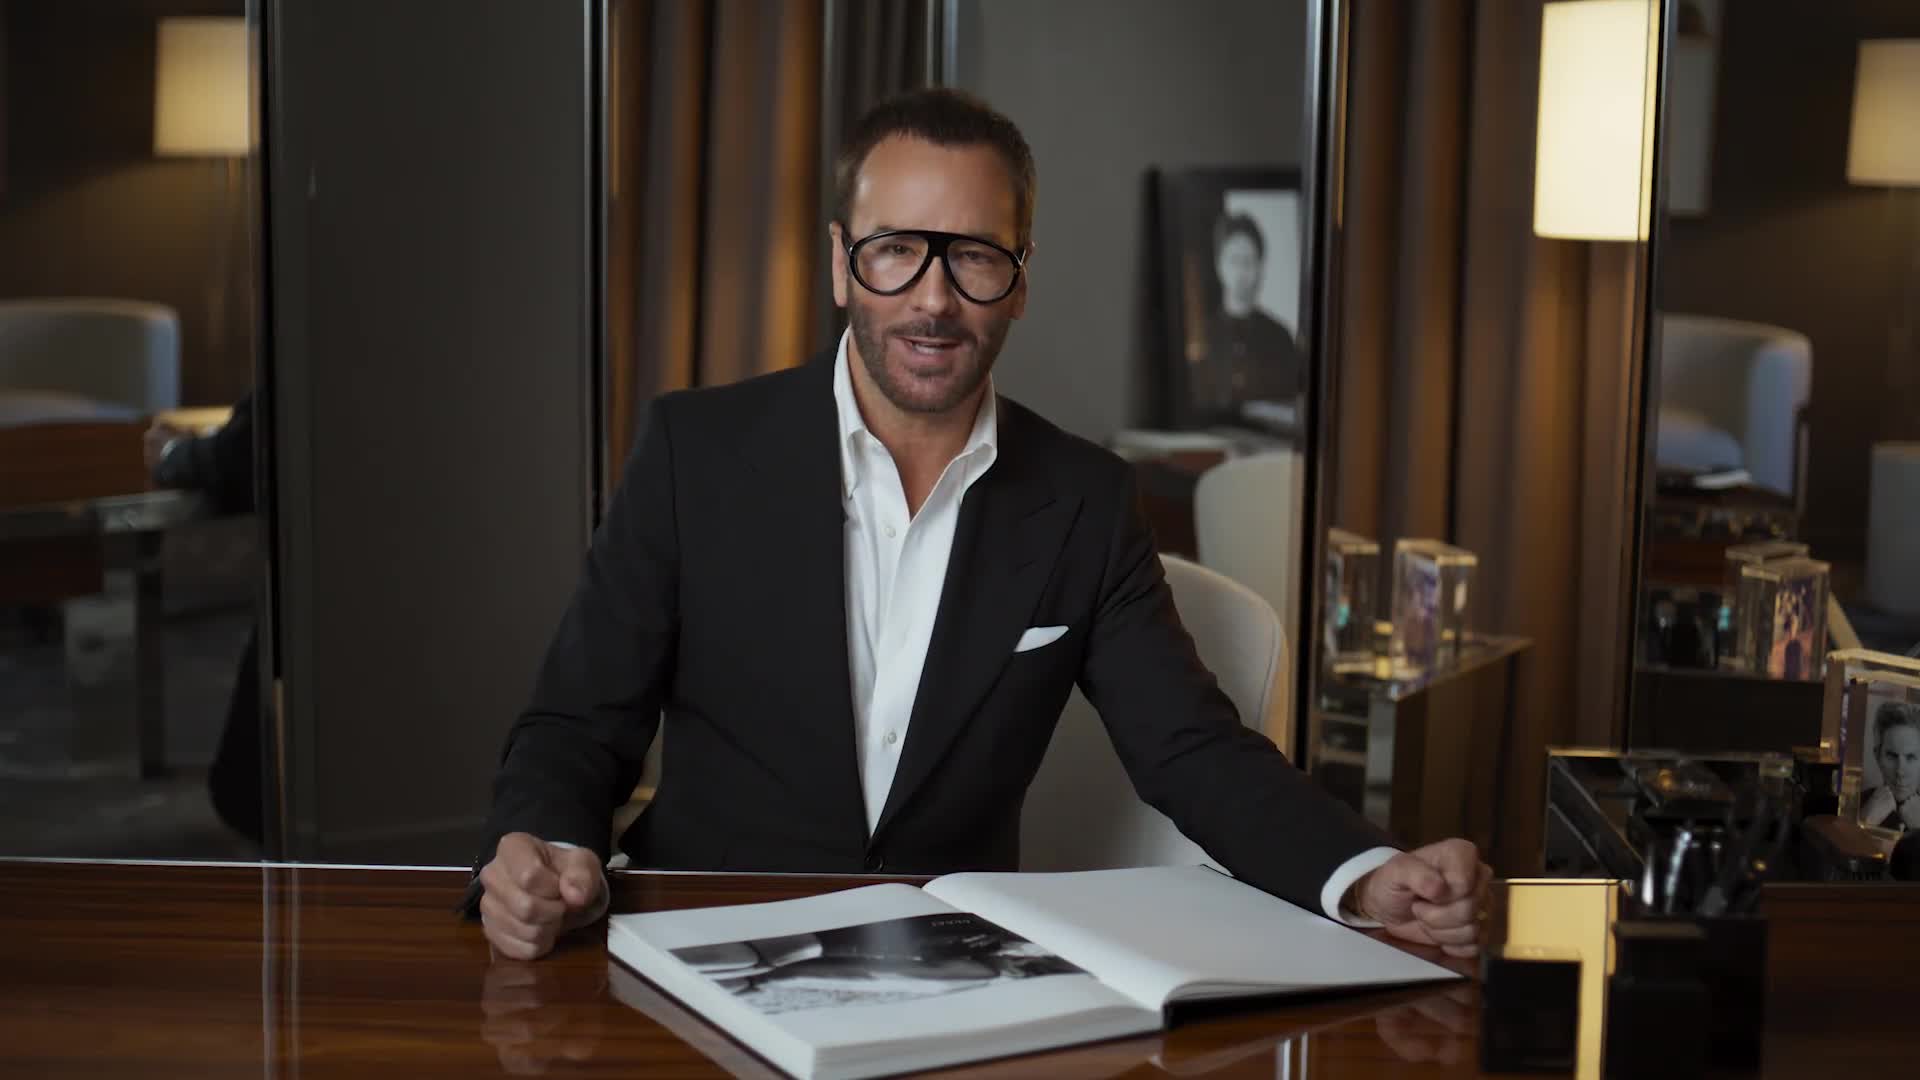 What is Tom Ford's Net Worth?